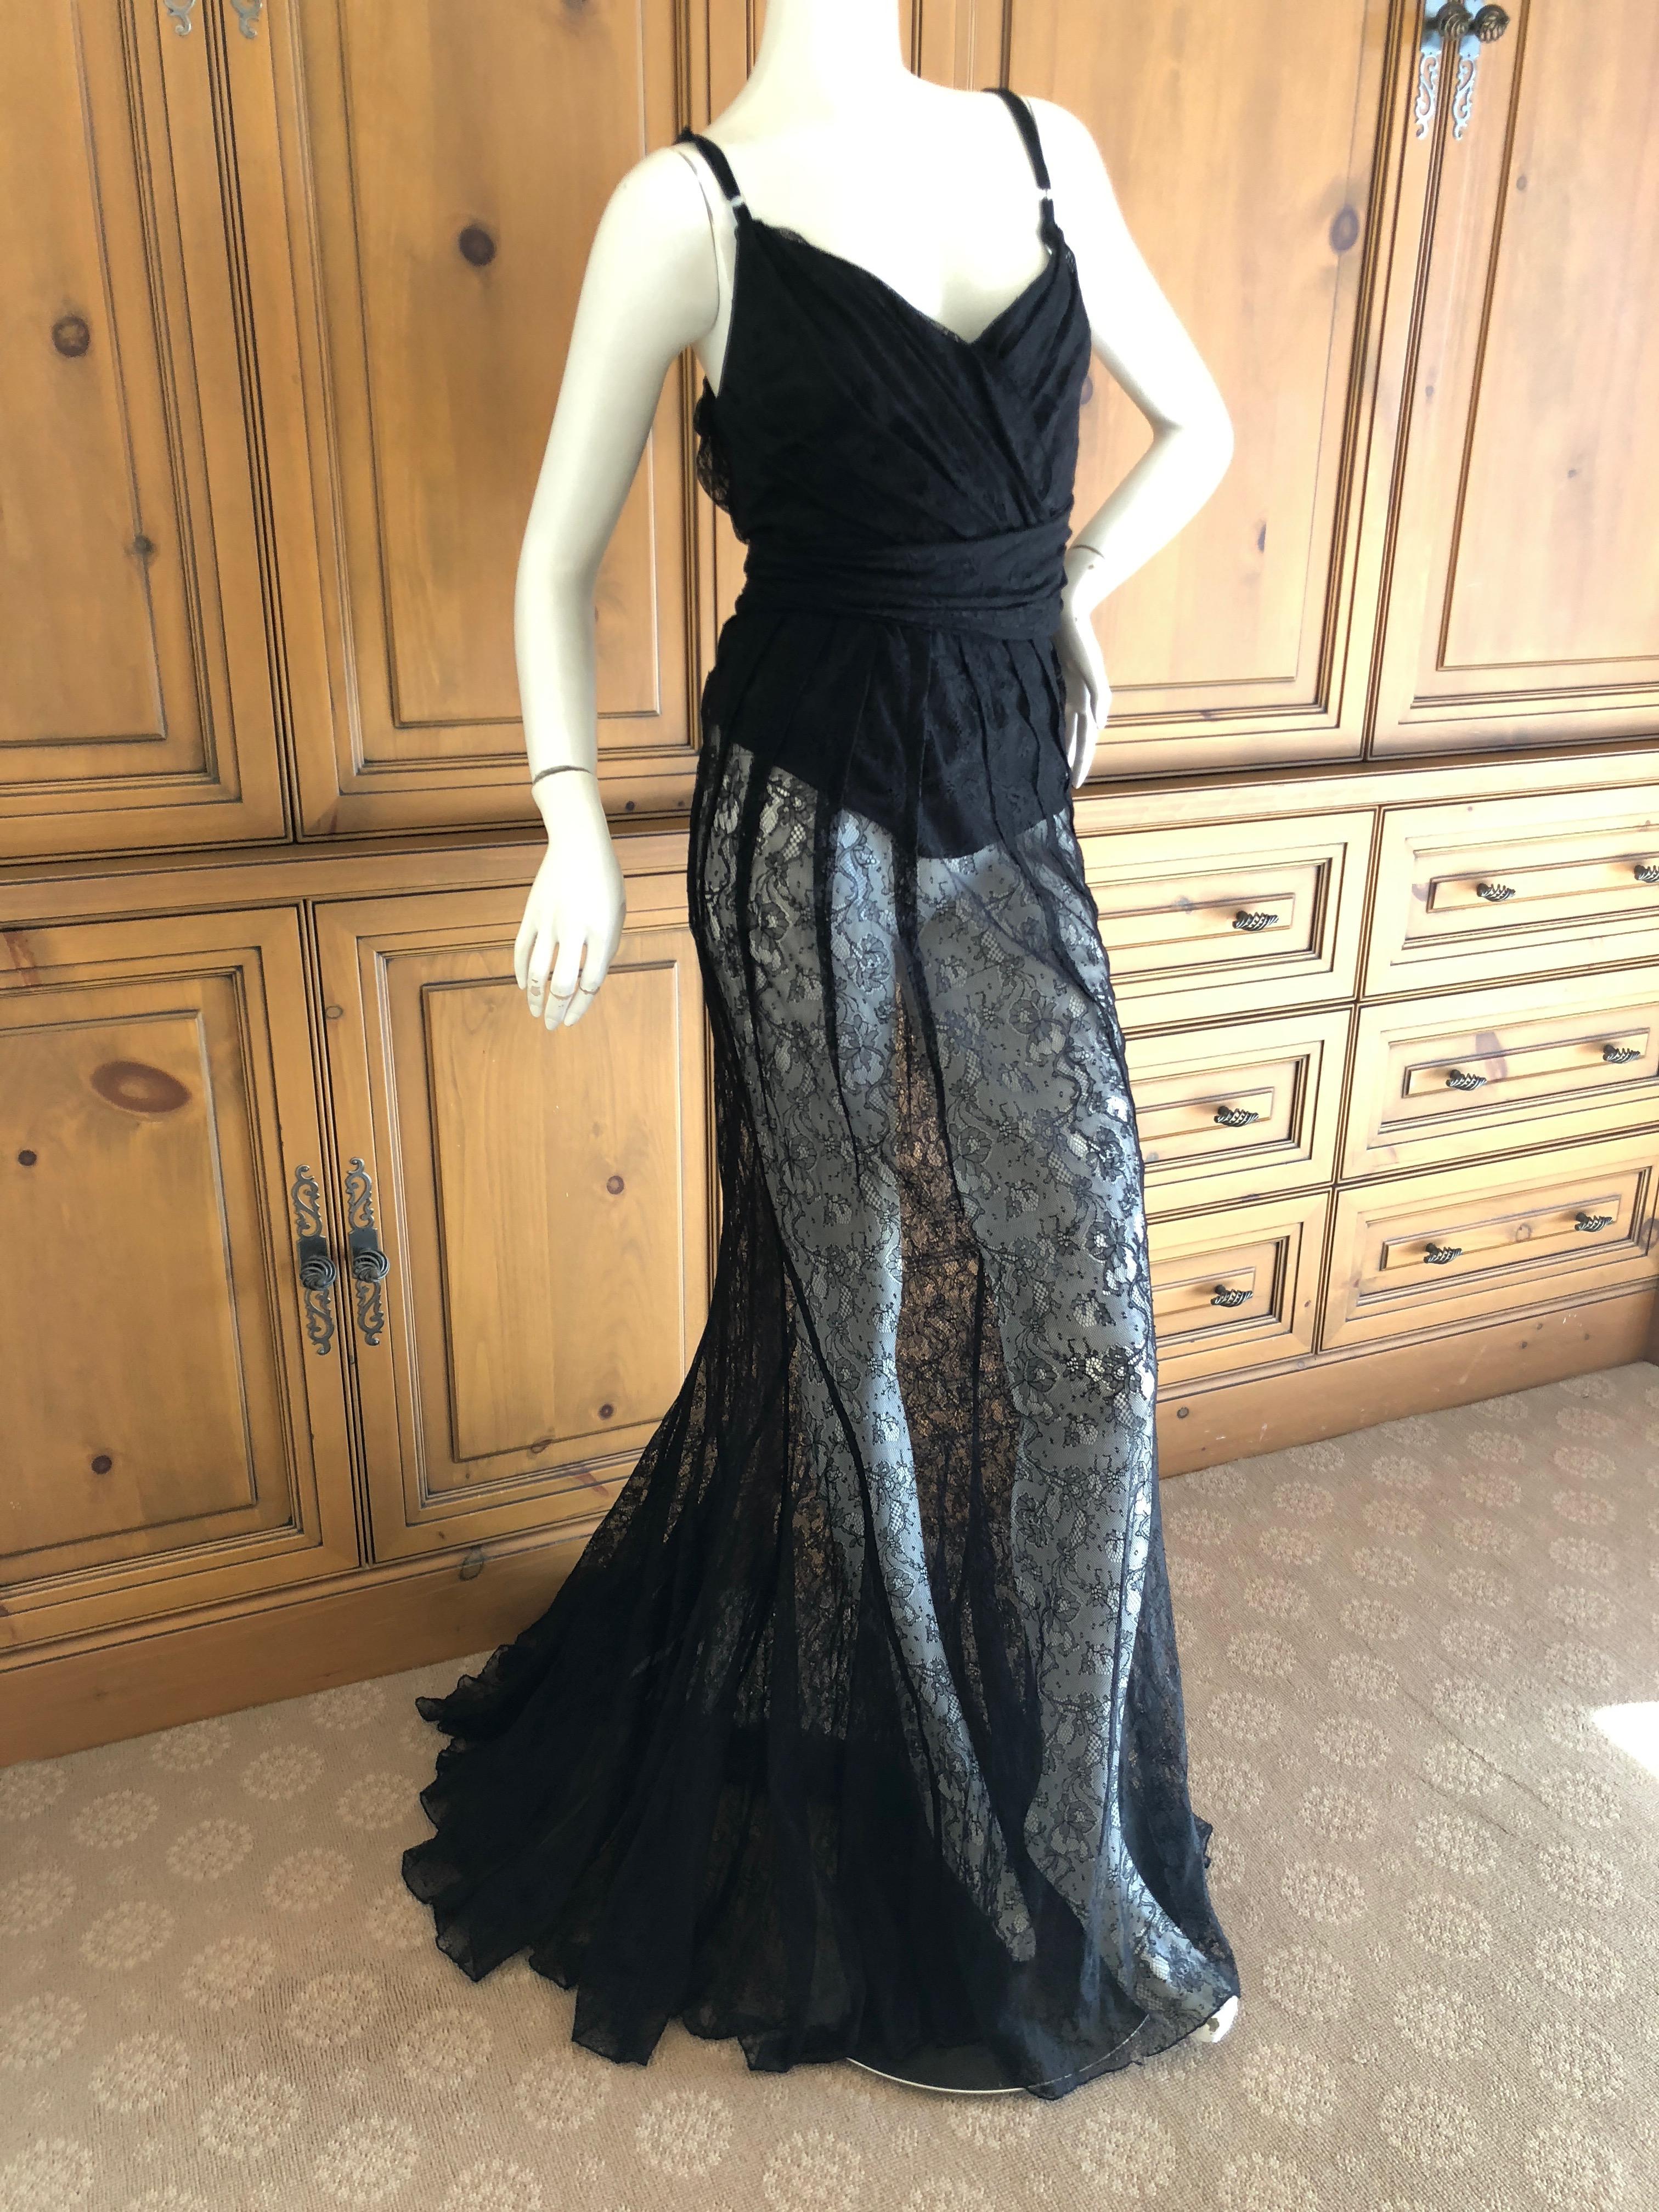 D&G Dolce & Gabbana Sheer Black Lace Vintage Evening Dress with Train.
It is fully lined, but I also show it with the lace exposed by pulling it up.
Size 44
Bust 39